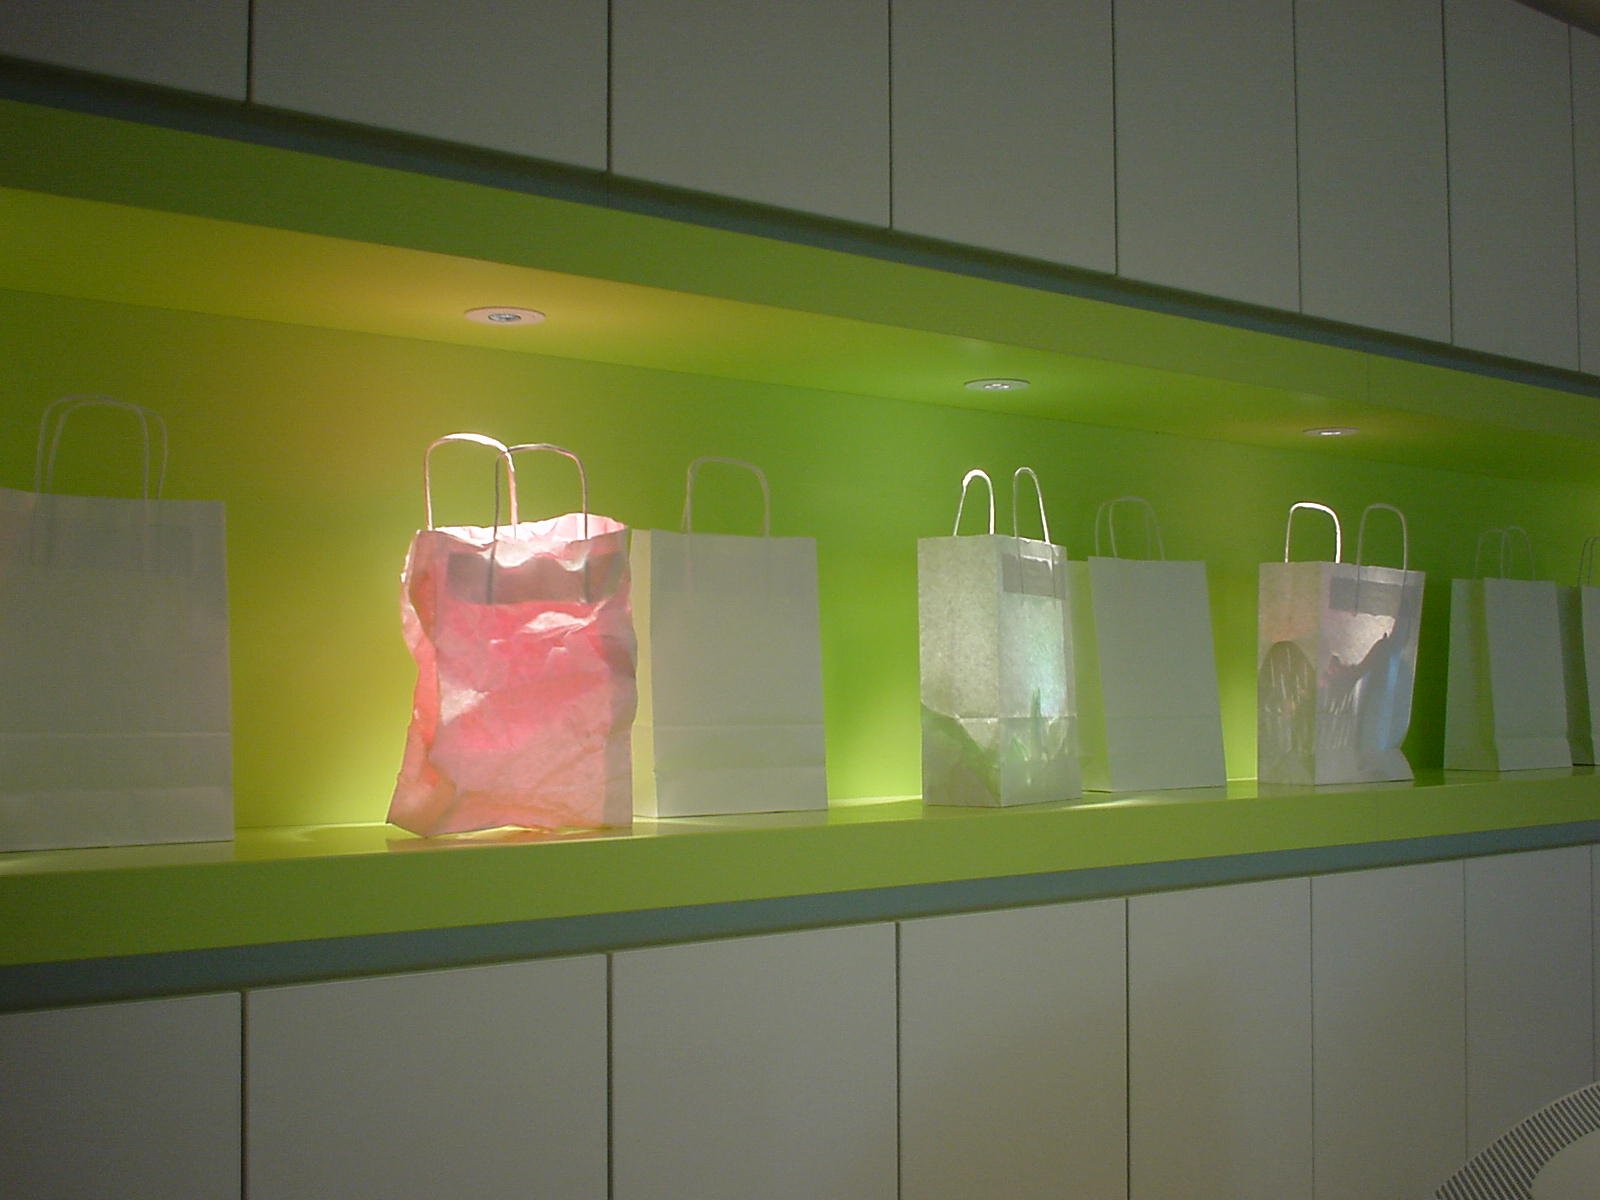 bags sitting on shelves in a store with no people